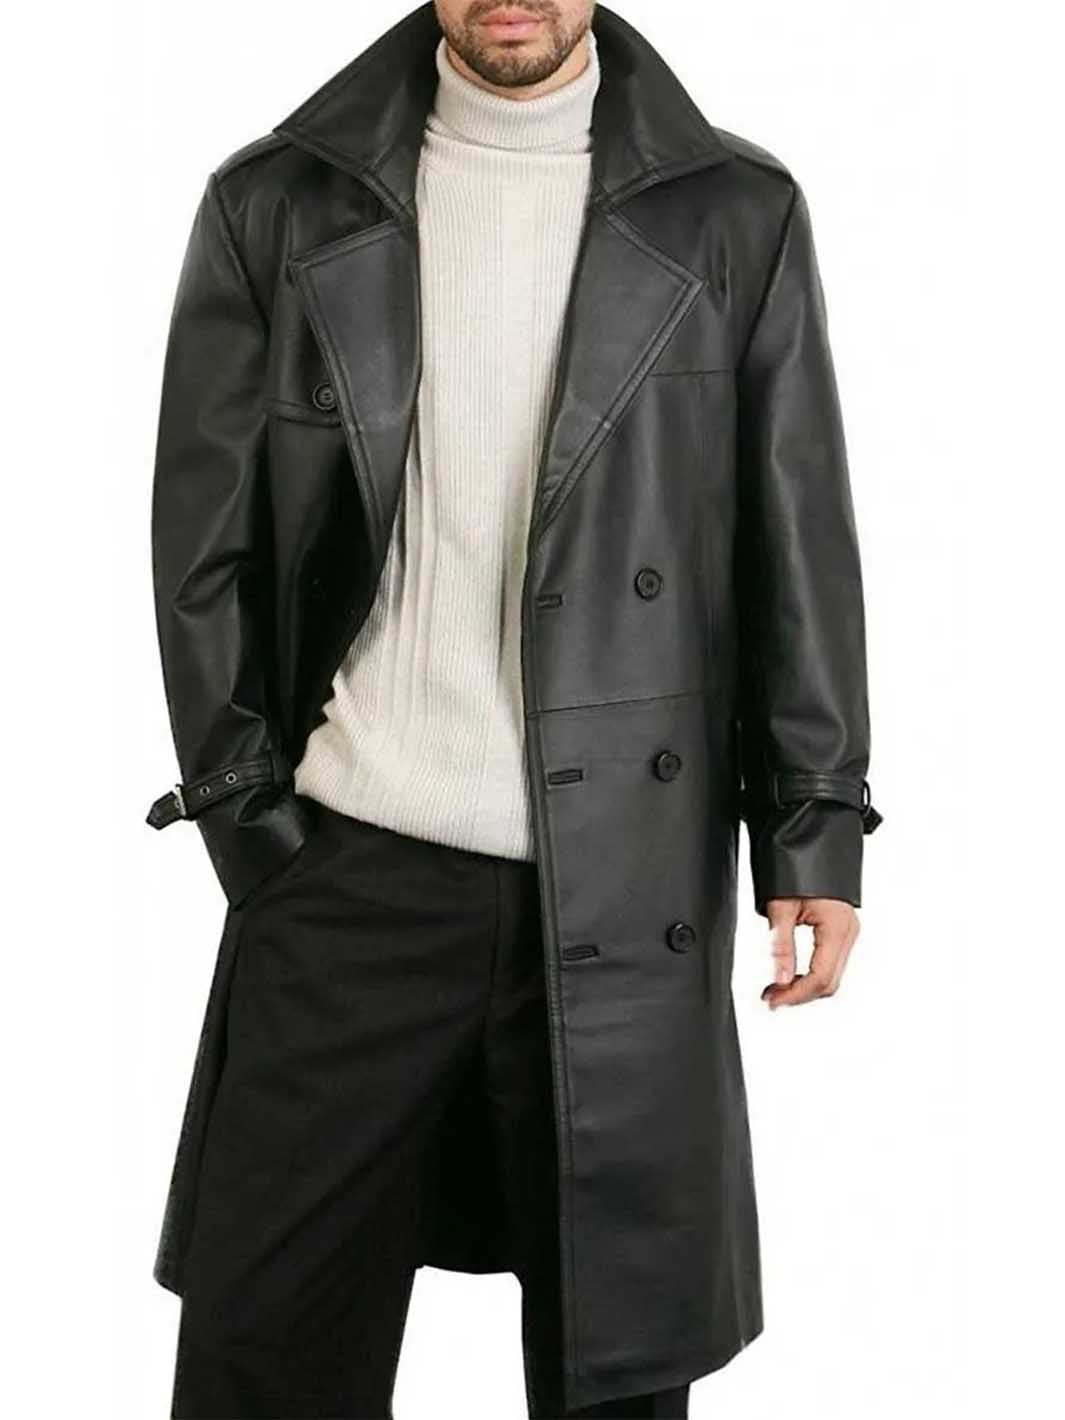 Mens Black Duster Overcoat Jacket with Real Leather | Stylish Charm ...